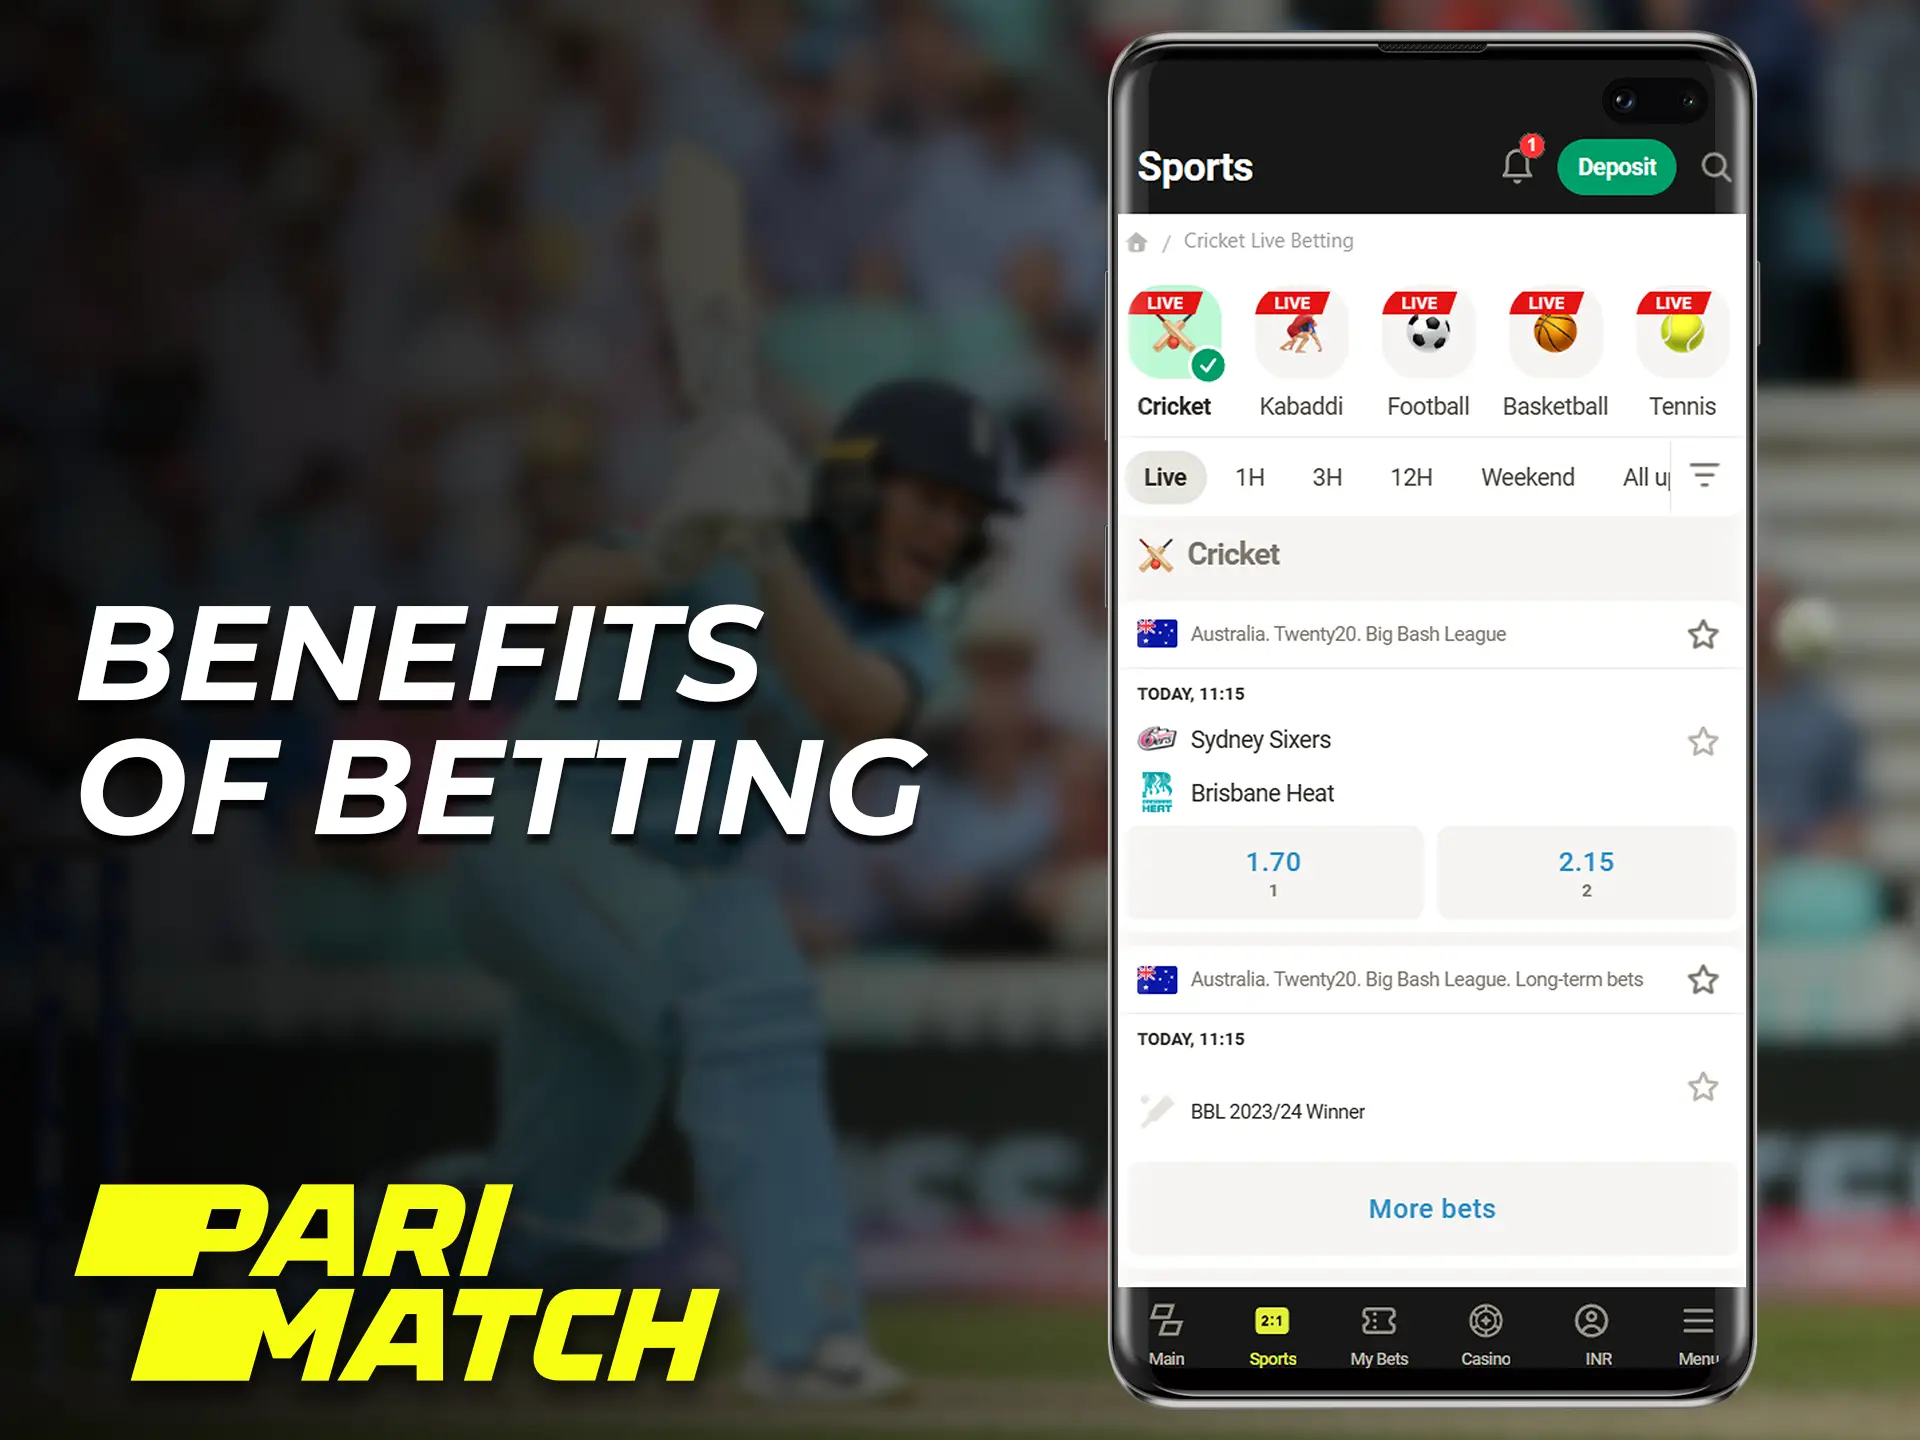 Check out a number of benefits of betting via the Parimatch mobile app.